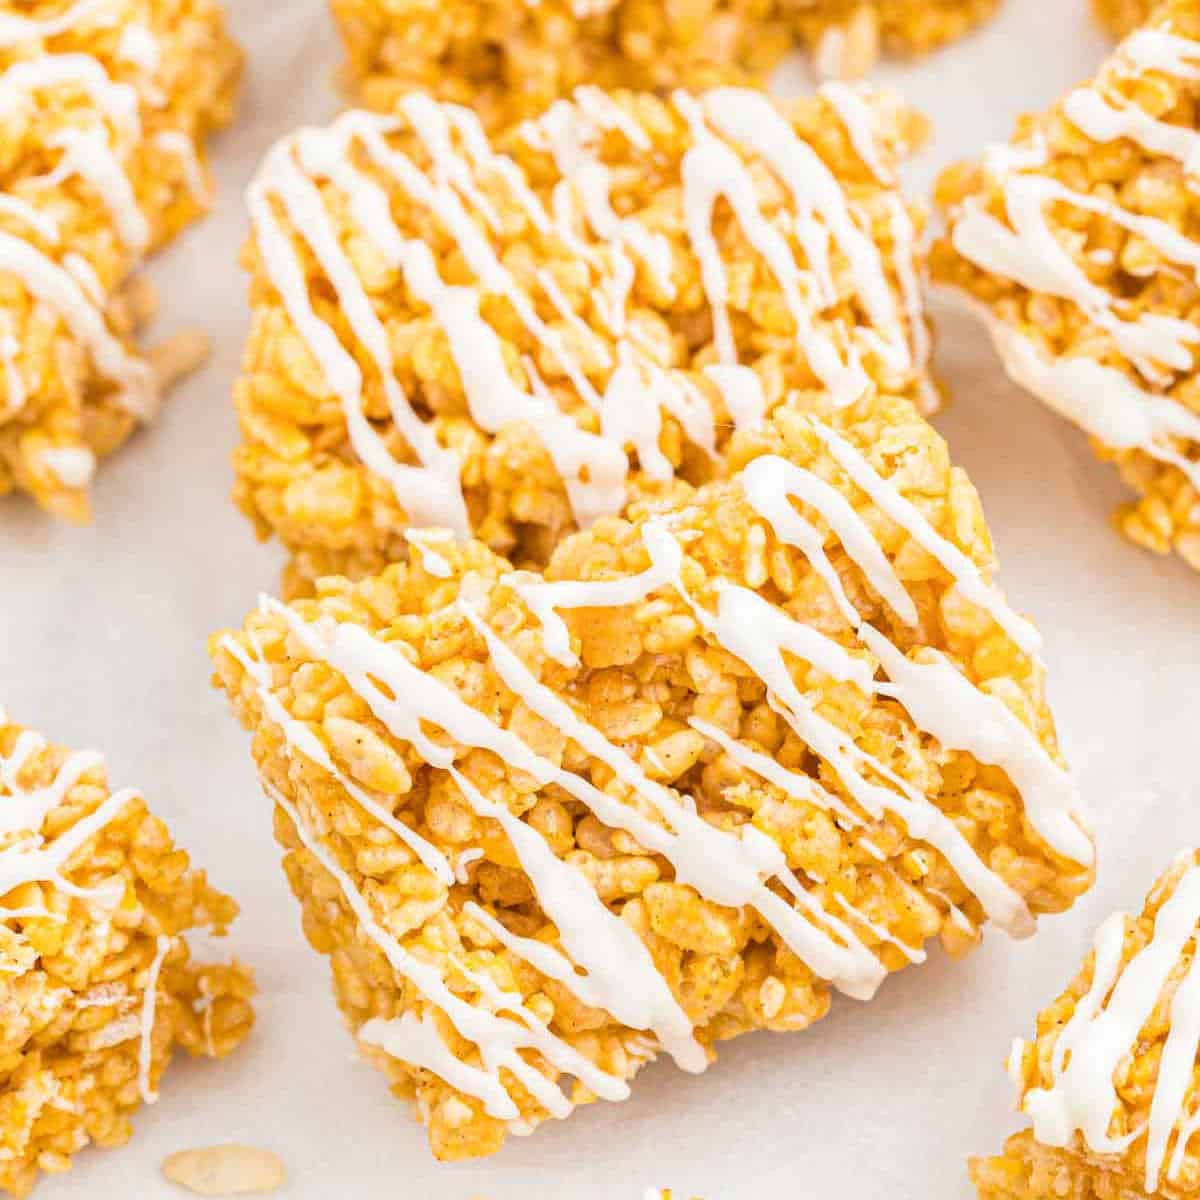 Close-up of a batch of golden pumpkin rice krispie treats, drizzled with white icing. The treats are arranged in a slightly scattered manner on a light surface, showcasing their crispy texture and sweet glaze.